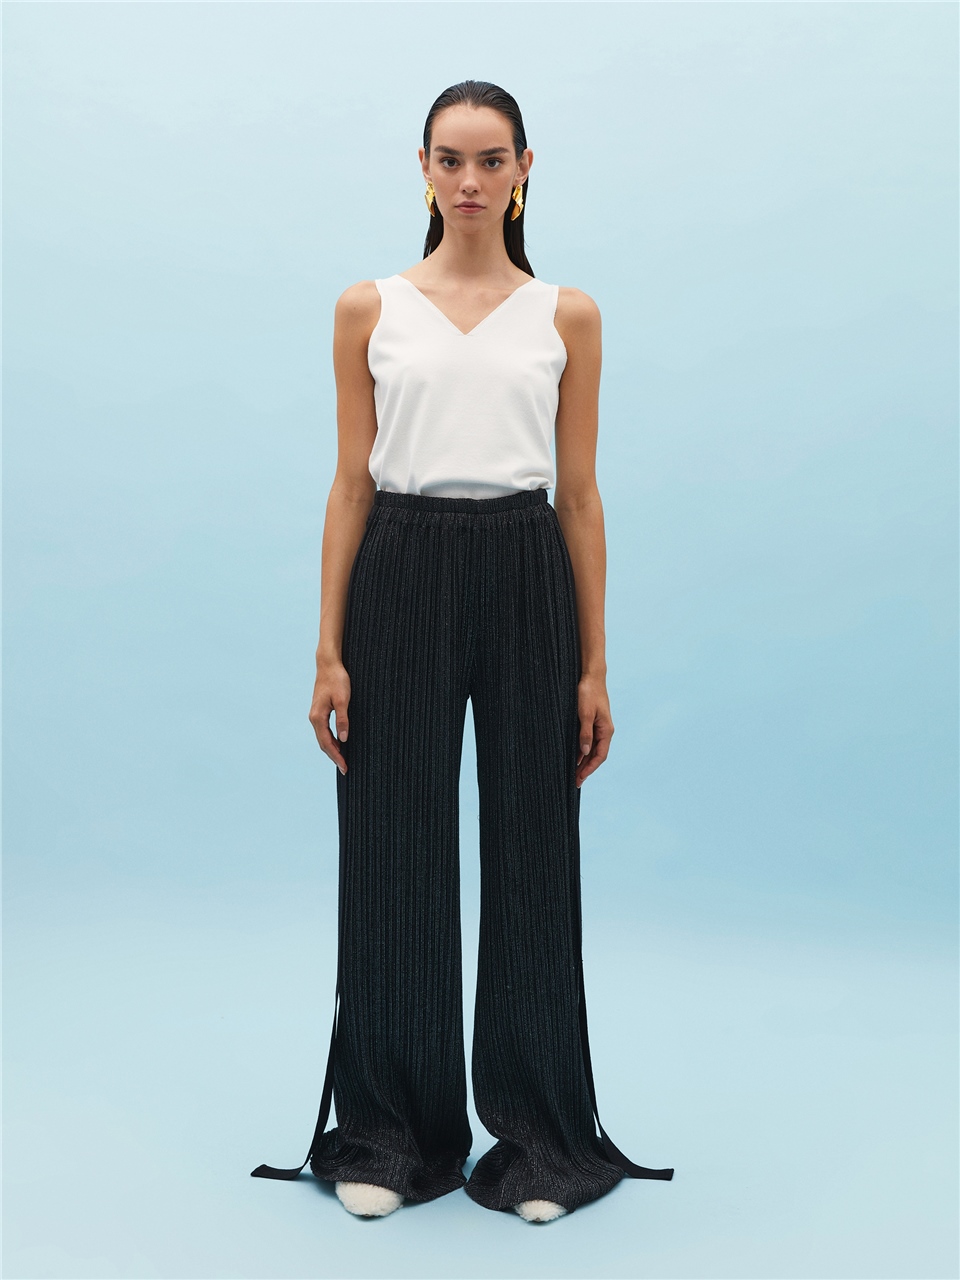 ZARA - NEW COLLECTION - WIDE PLEATED TROUSERS | Trousers women, Maxi pants,  Zara